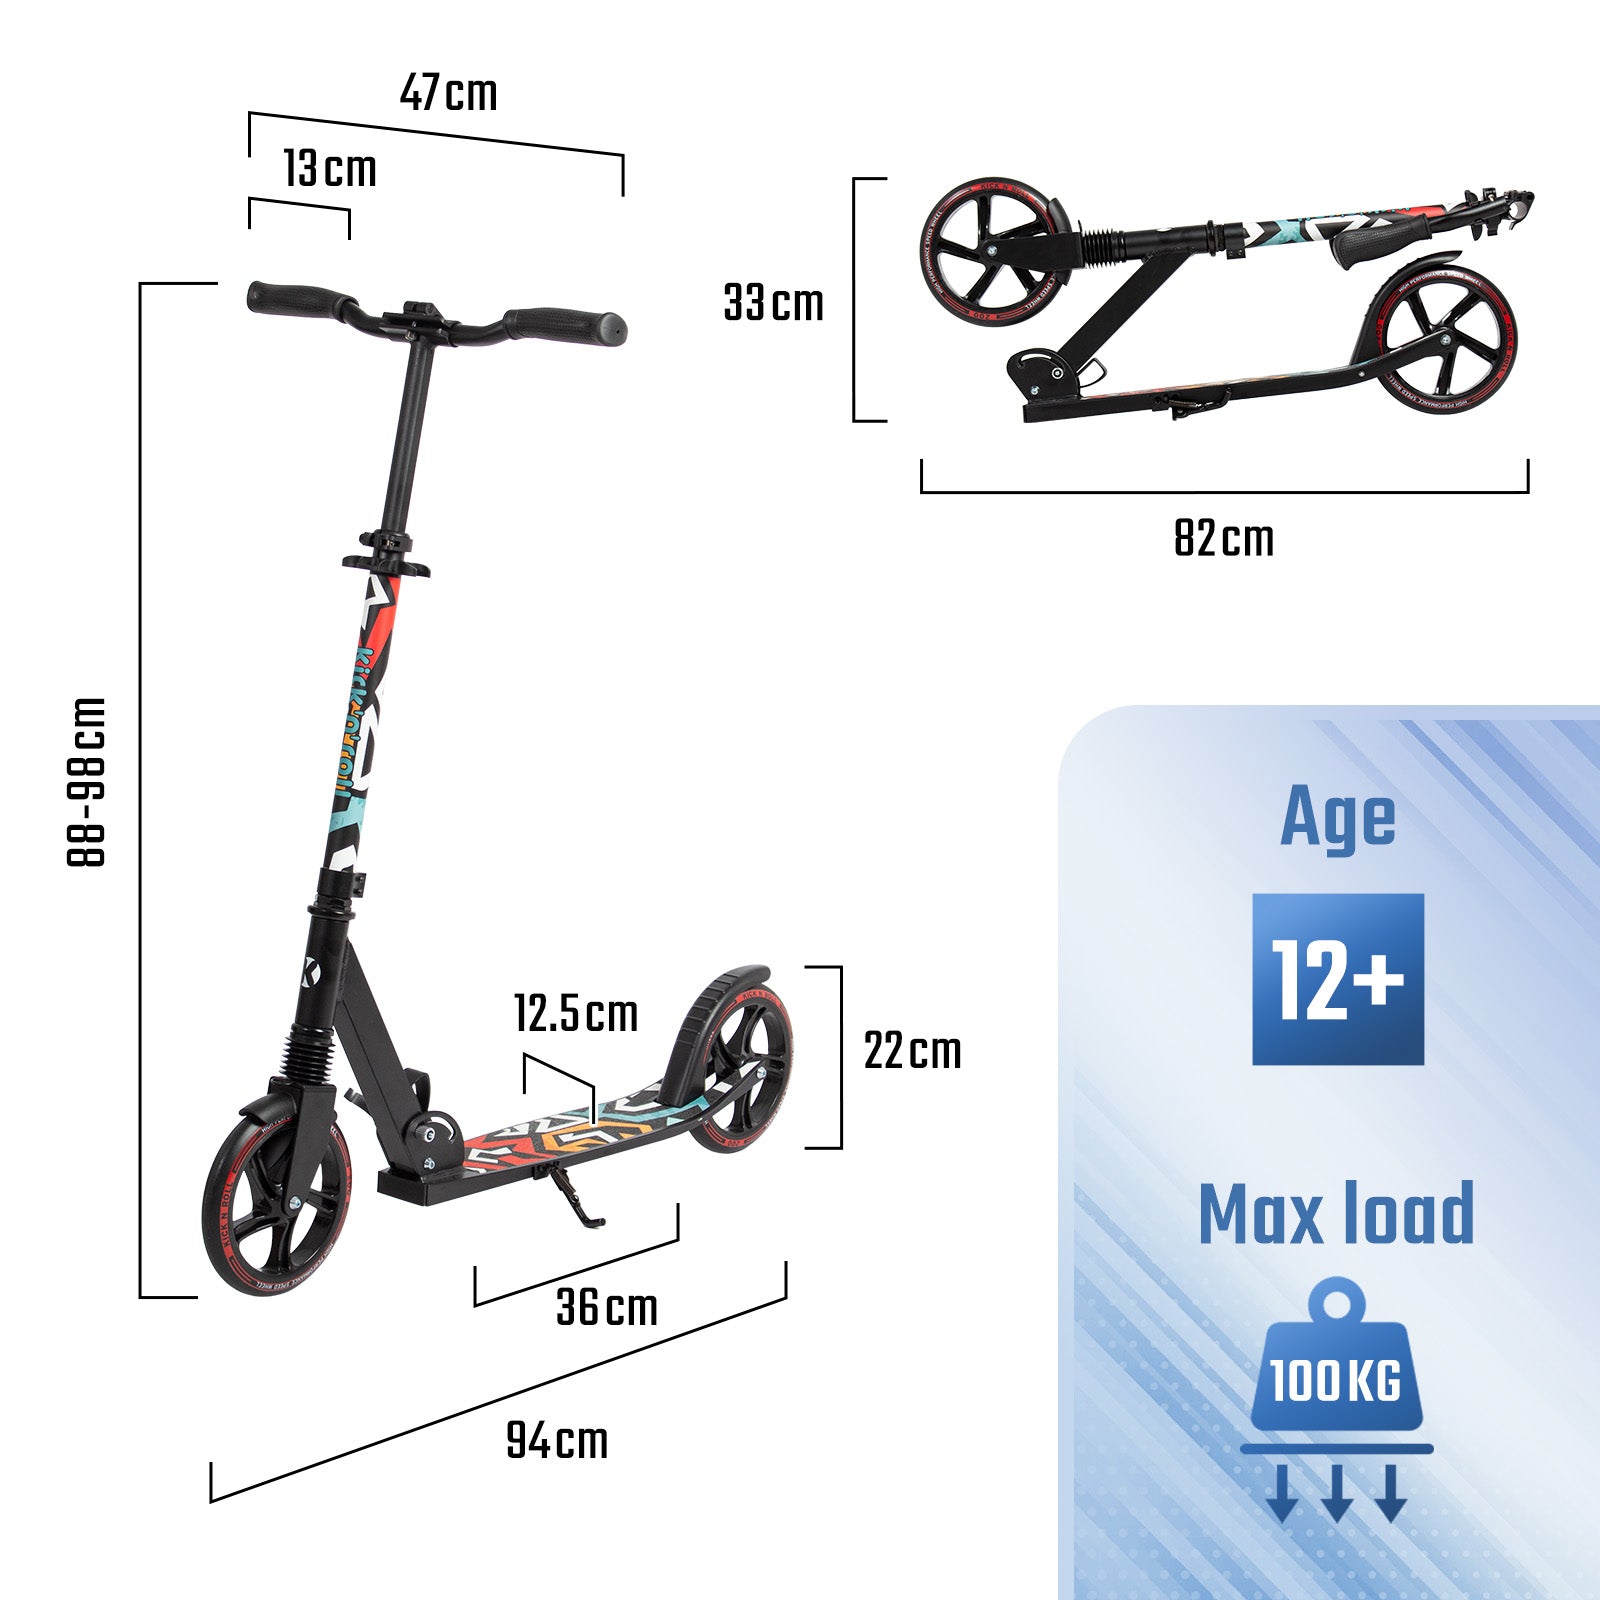 Foldable-Scooter-Scooter-Height-Adjustable-Foldable-City-Scooter-with-Kickstand-205mm-Wheels-Stable-Aluminum-Scooter-for-Adults-and-Teenagers-up-to-100kg